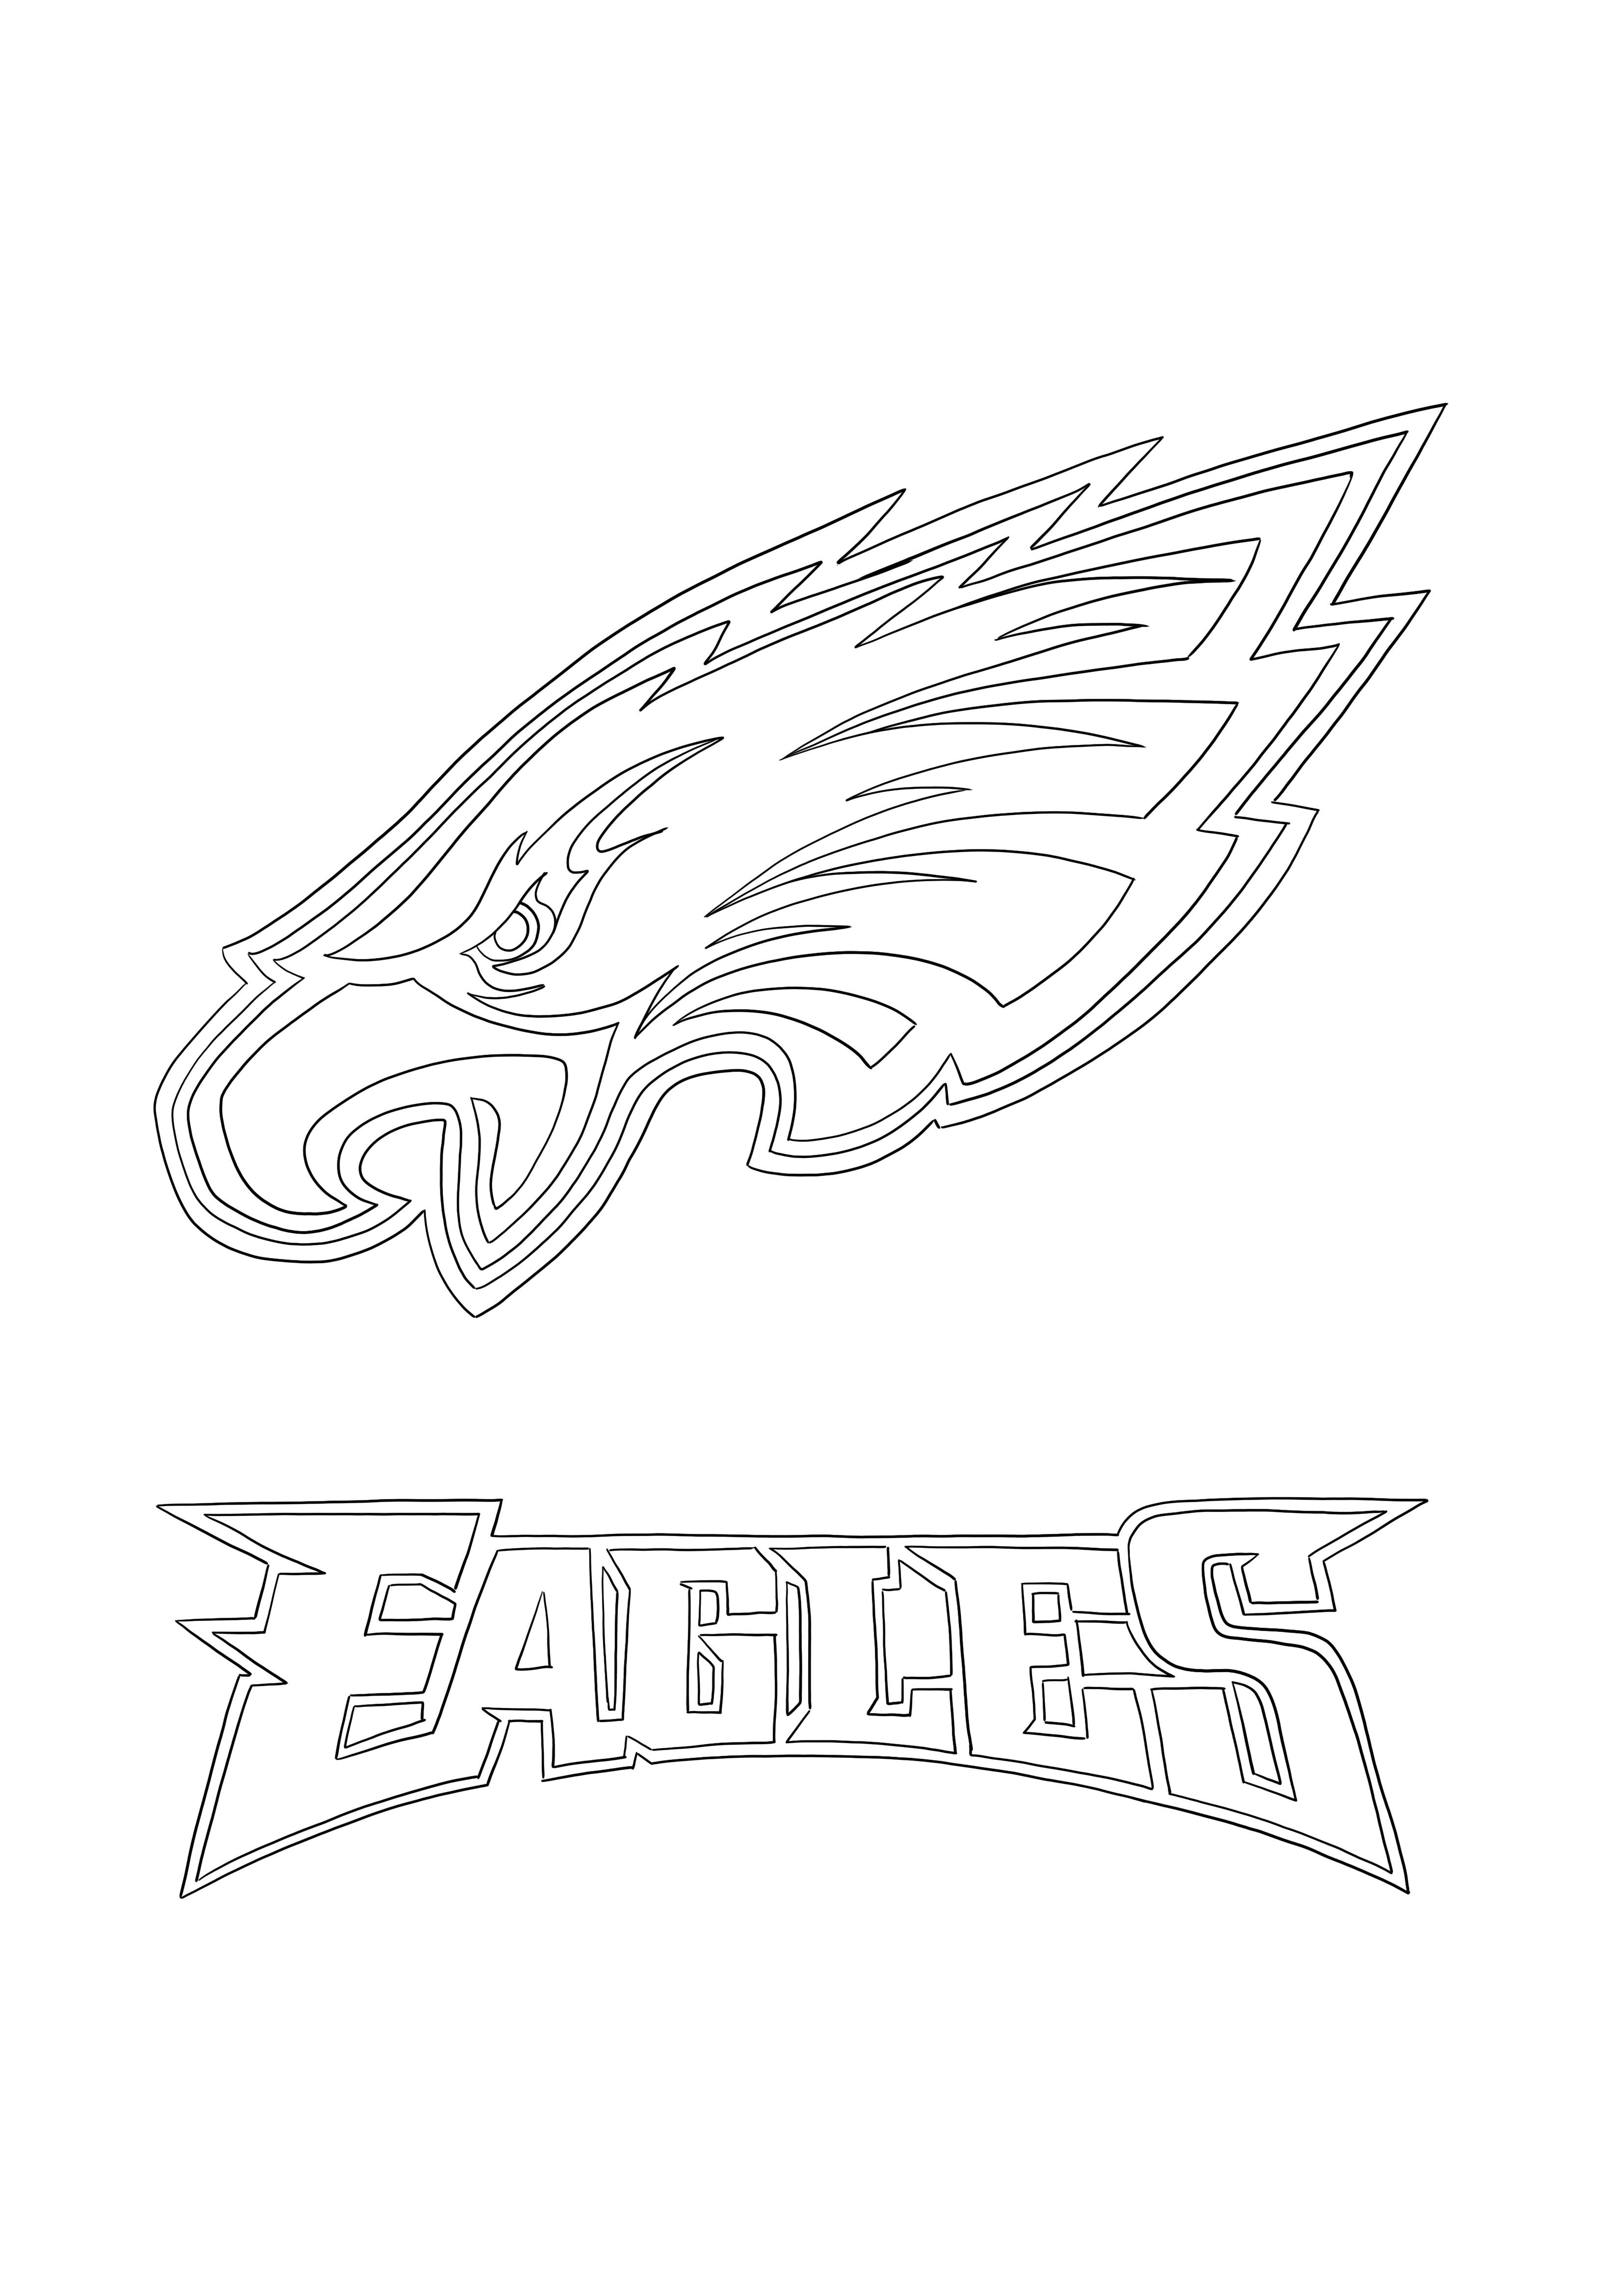 Coloring Pages Eagles Home Design Ideas